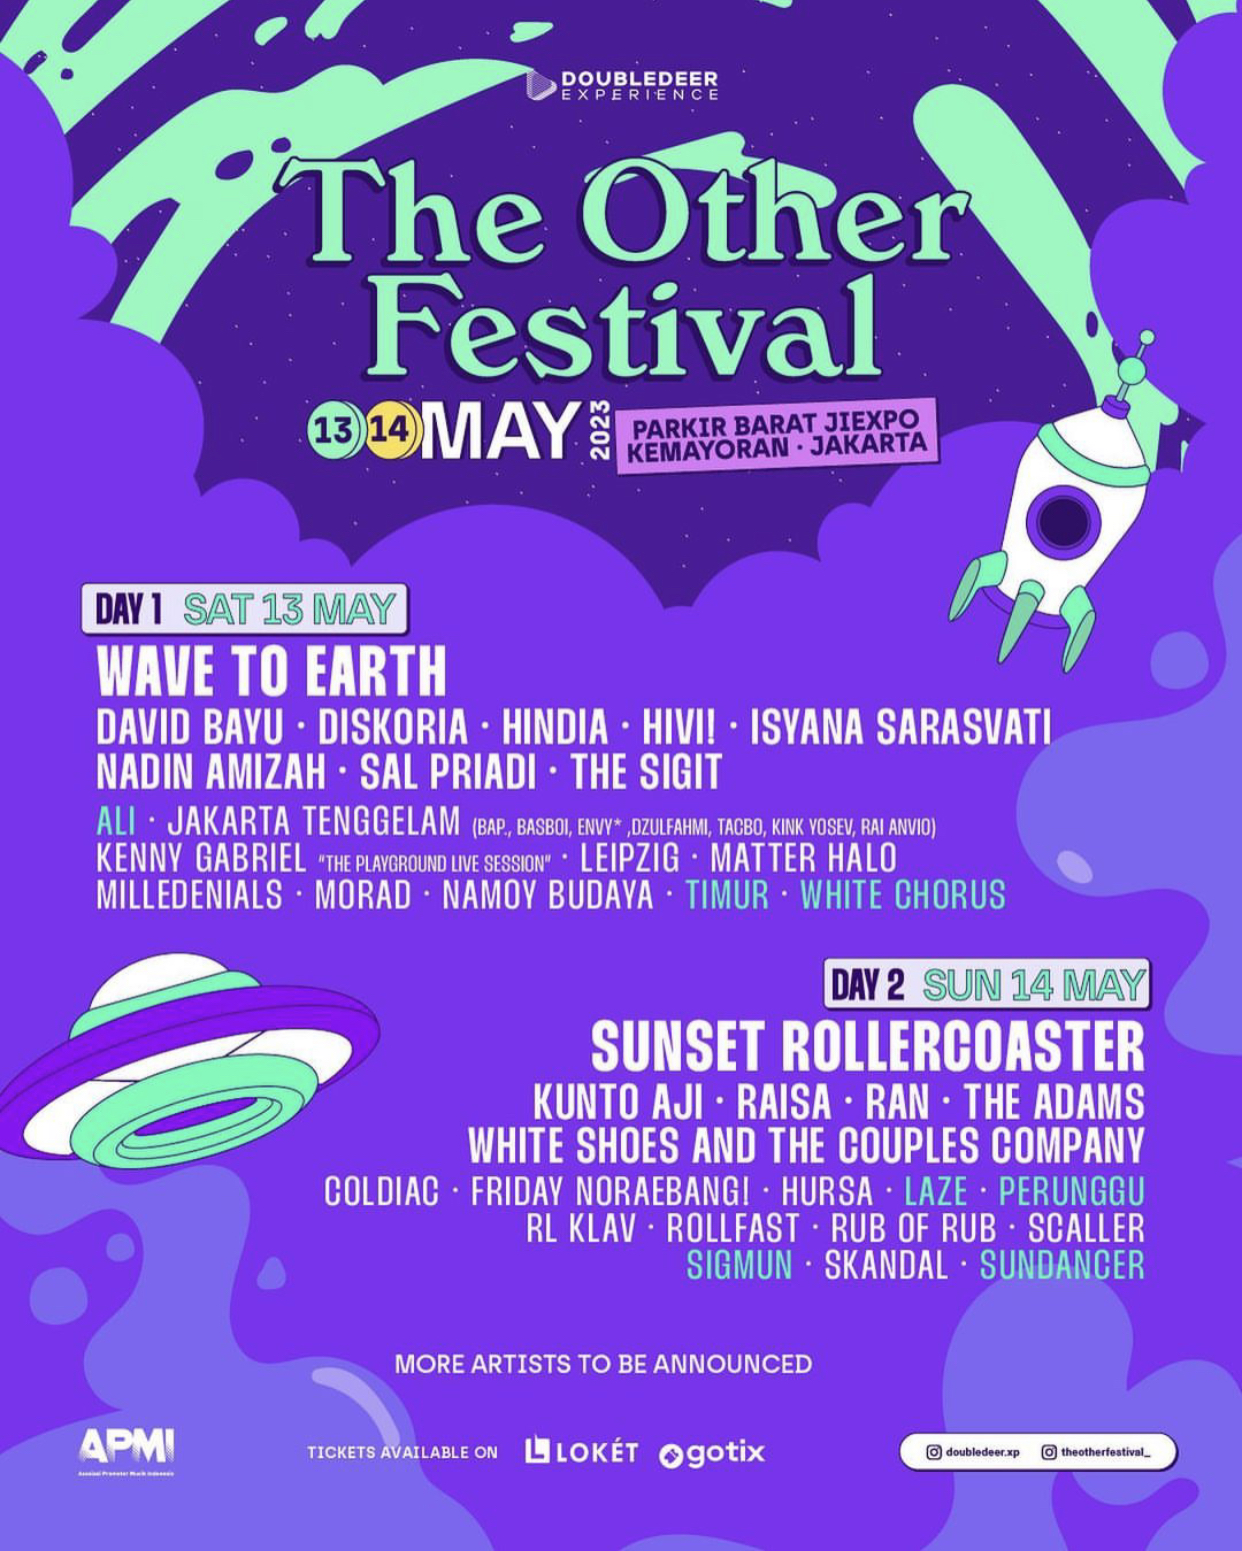 Lineup Sementara Penampil The Other Festival (Instagram/@theotherfestival_)